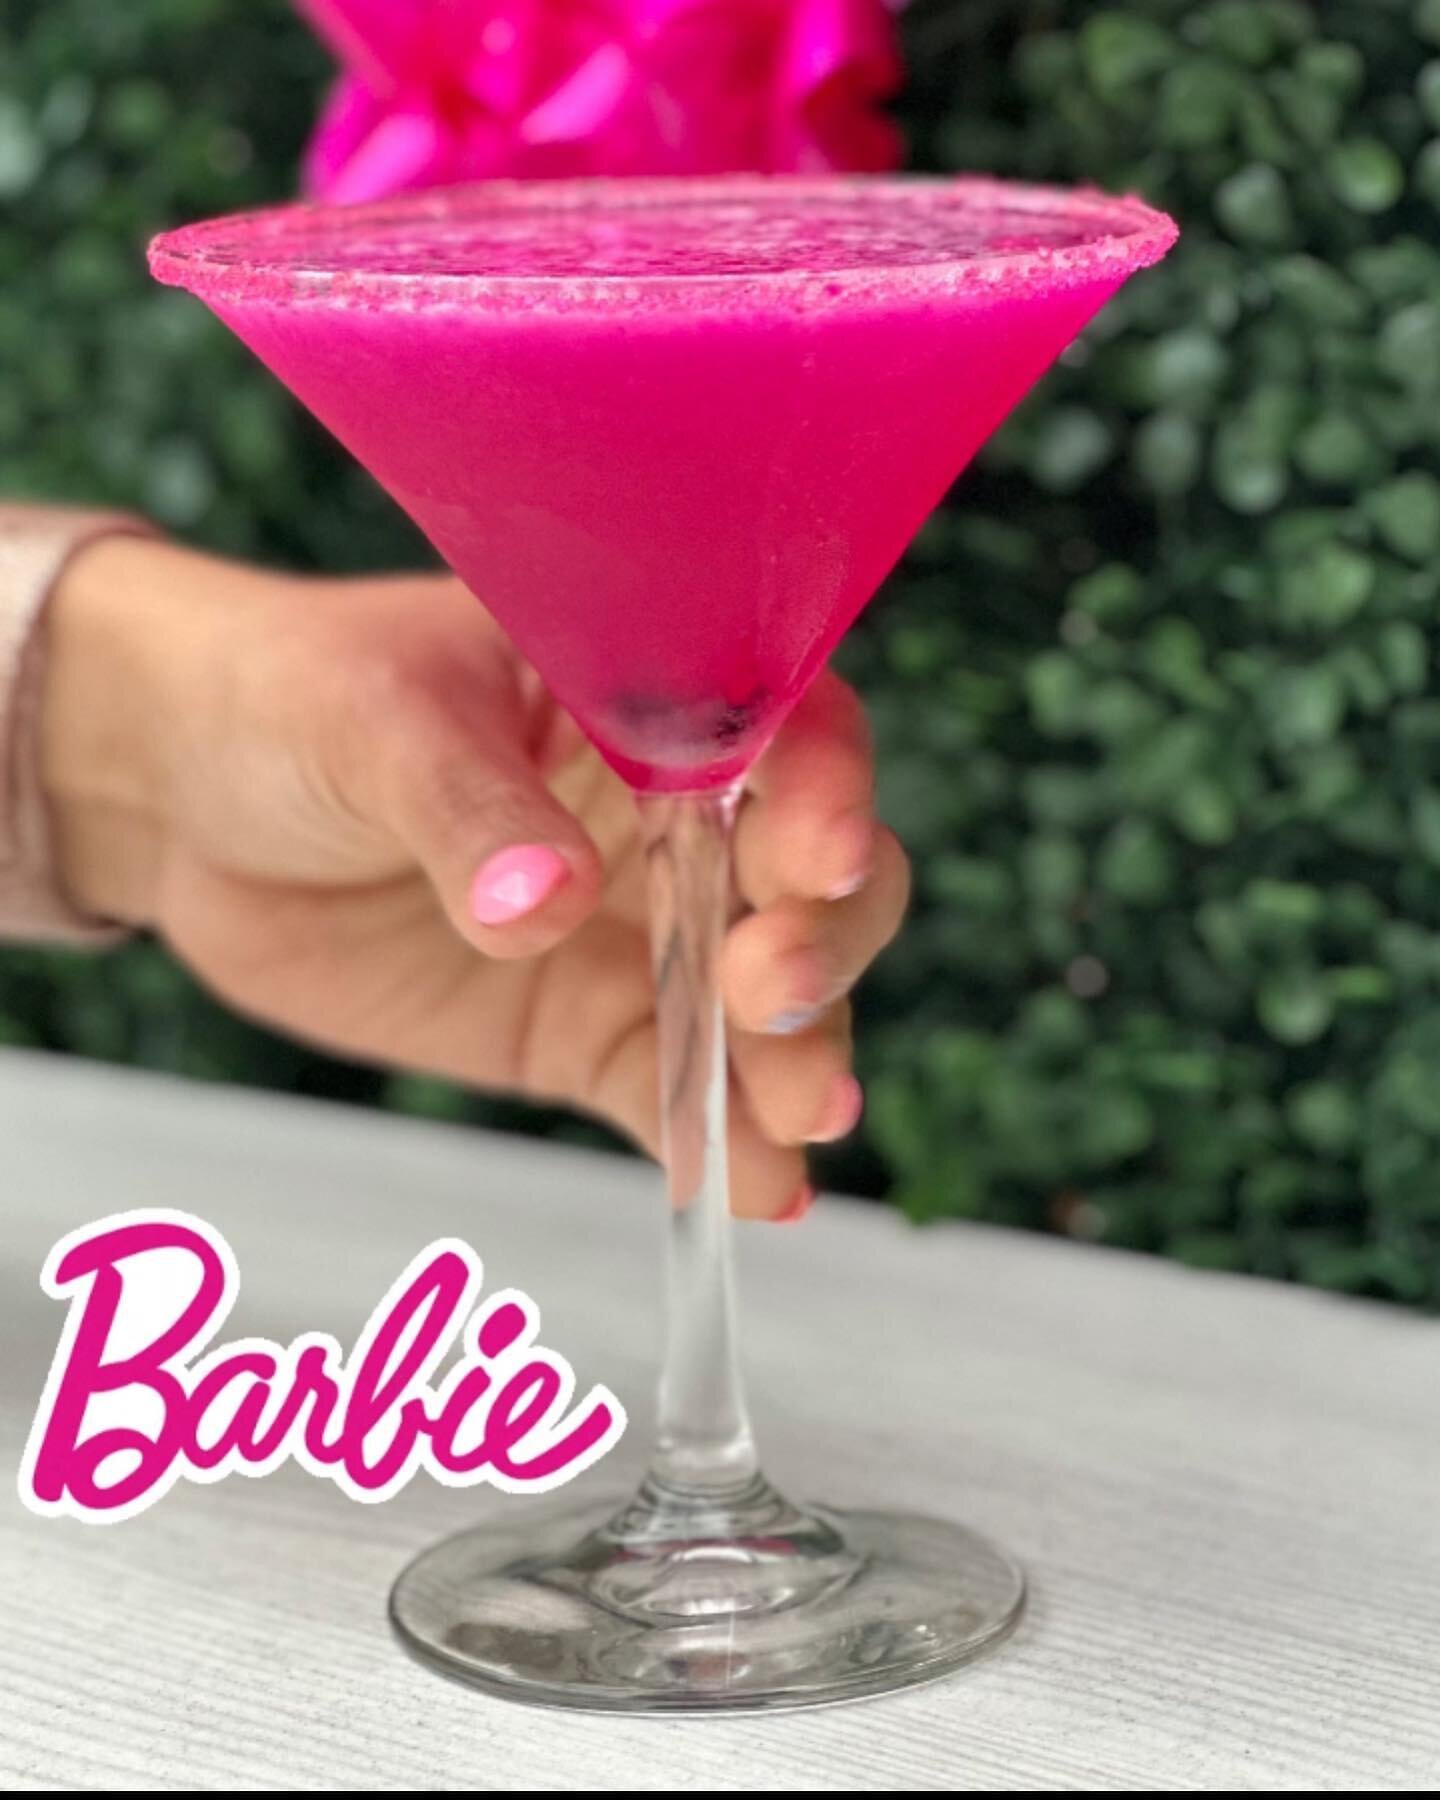 We highly recommended ➡️➡️Barbie Dragon Martini 🍸💖

⭐️⭐️⭐️⭐️⭐️